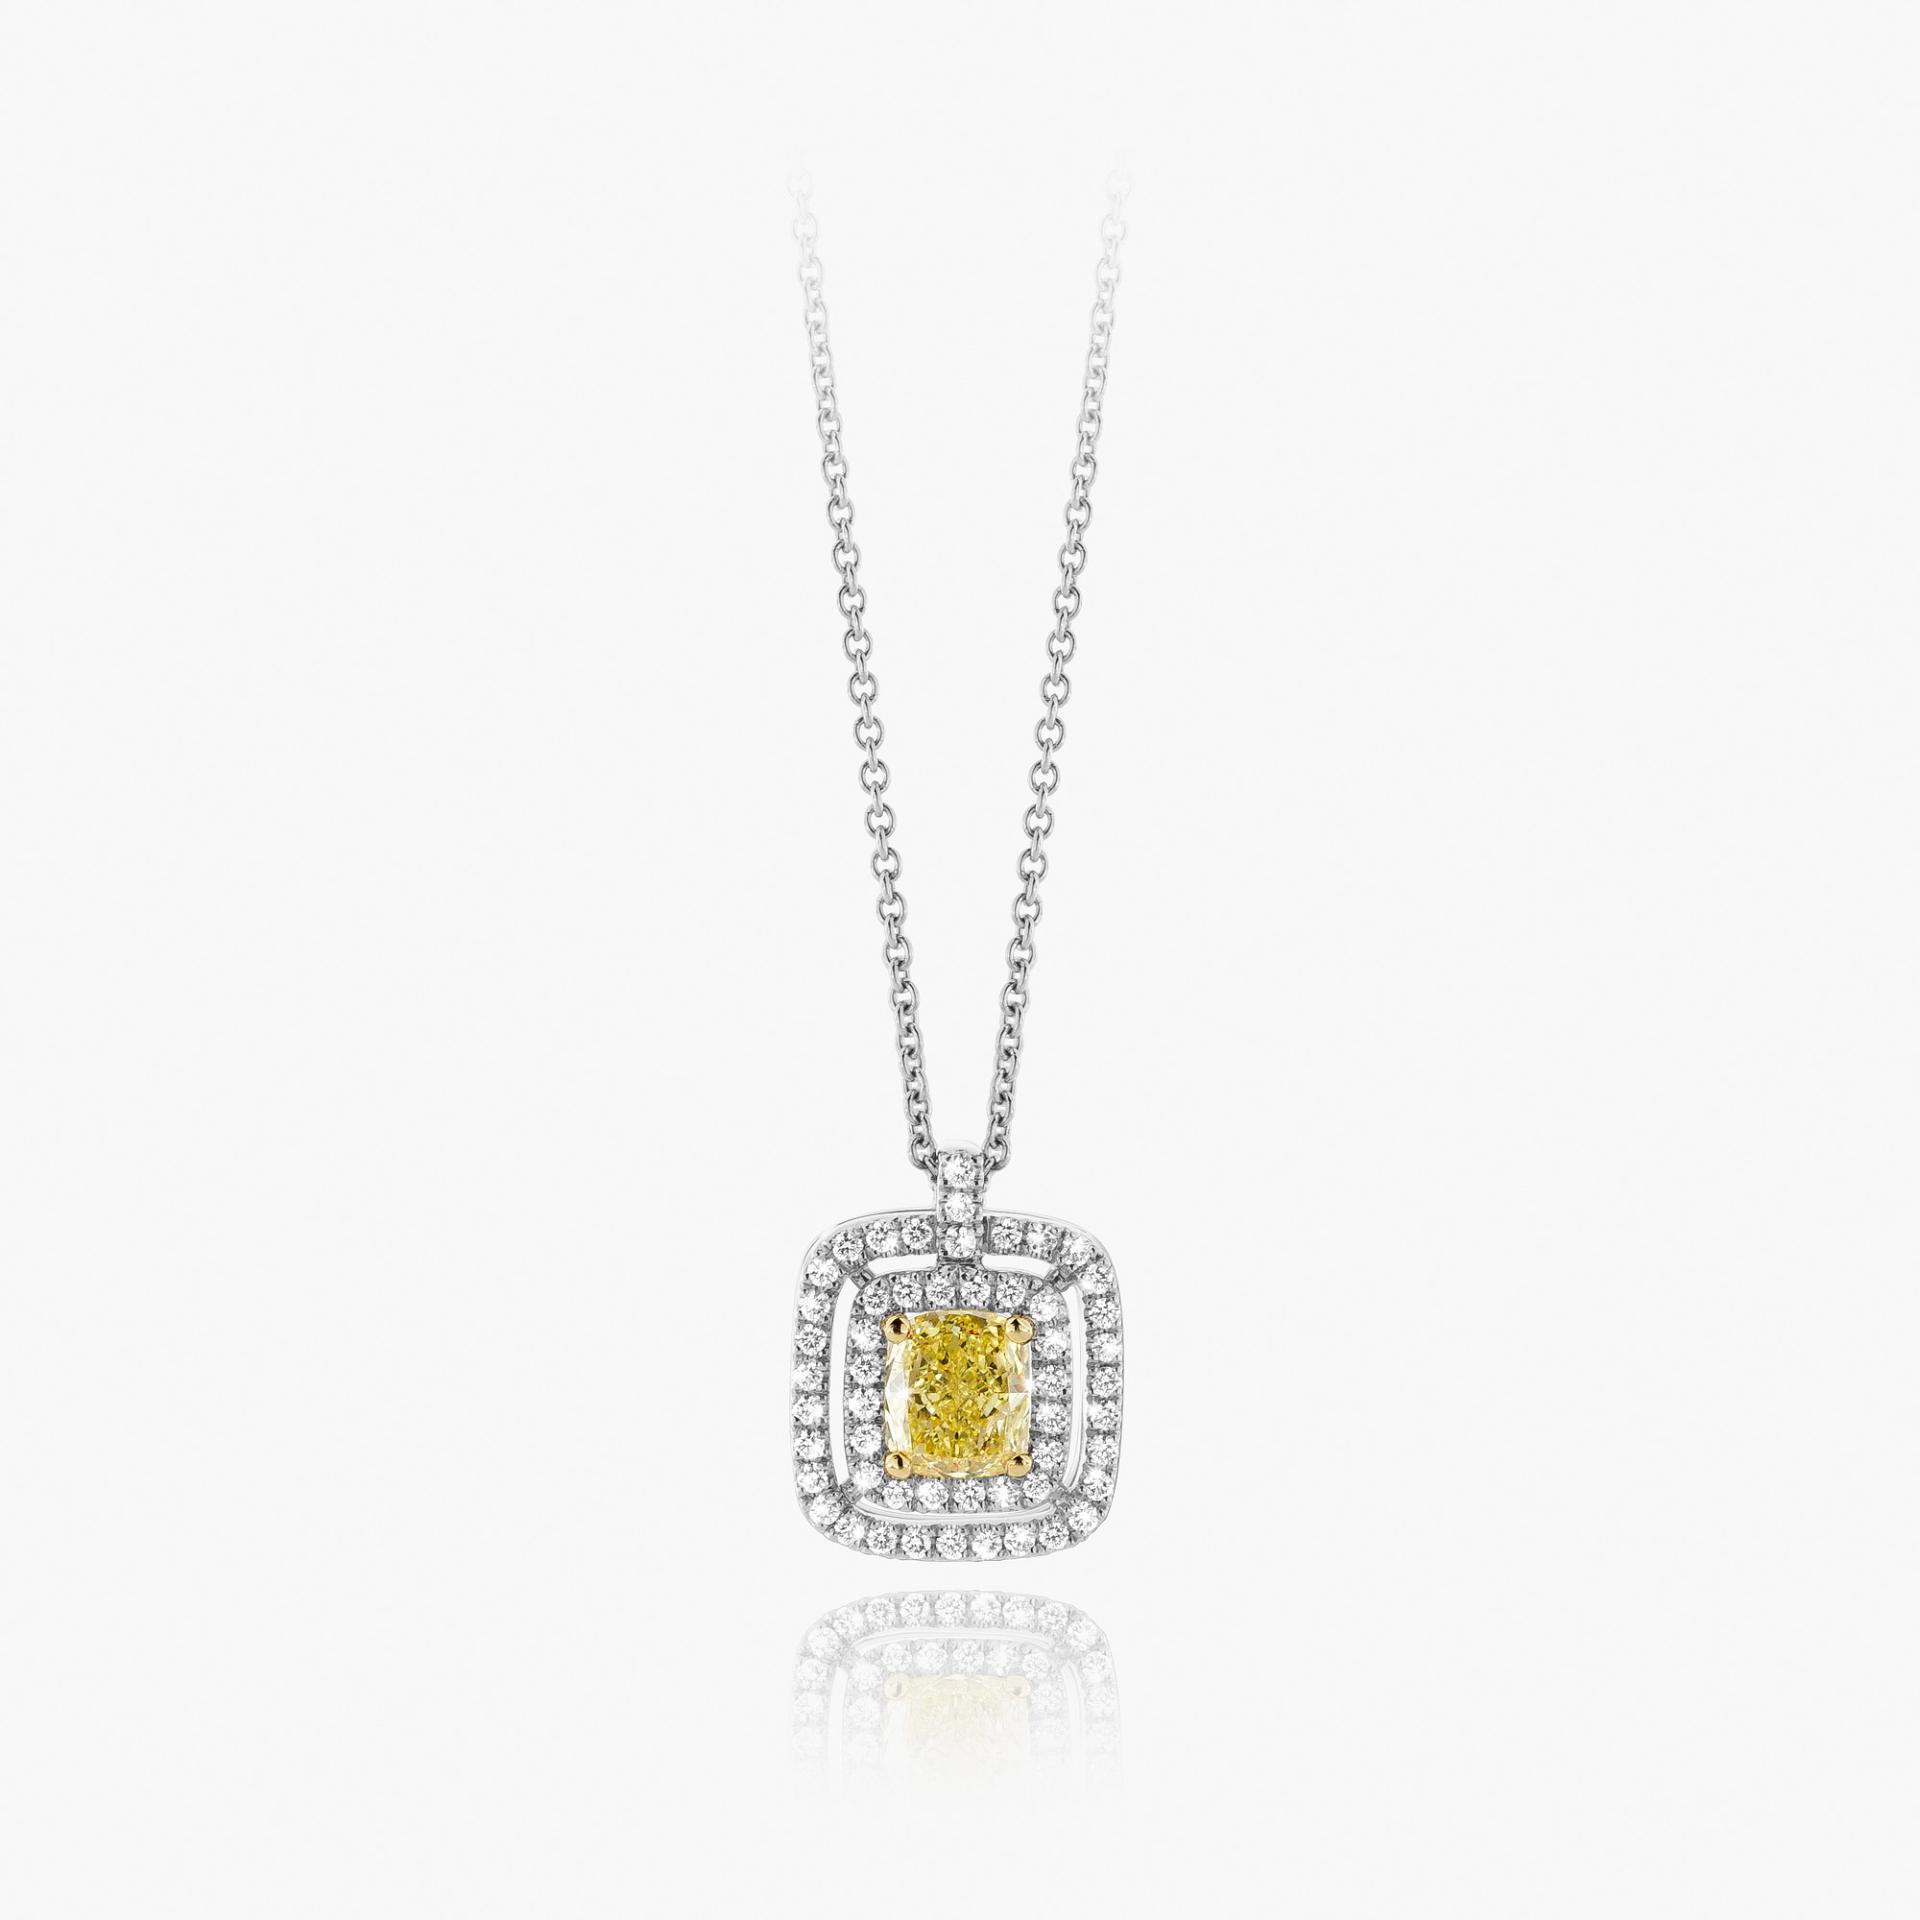 White gold pendant, set with an antique-cut fancy yellow diamond and framed by diamonds made by Maison De Greef